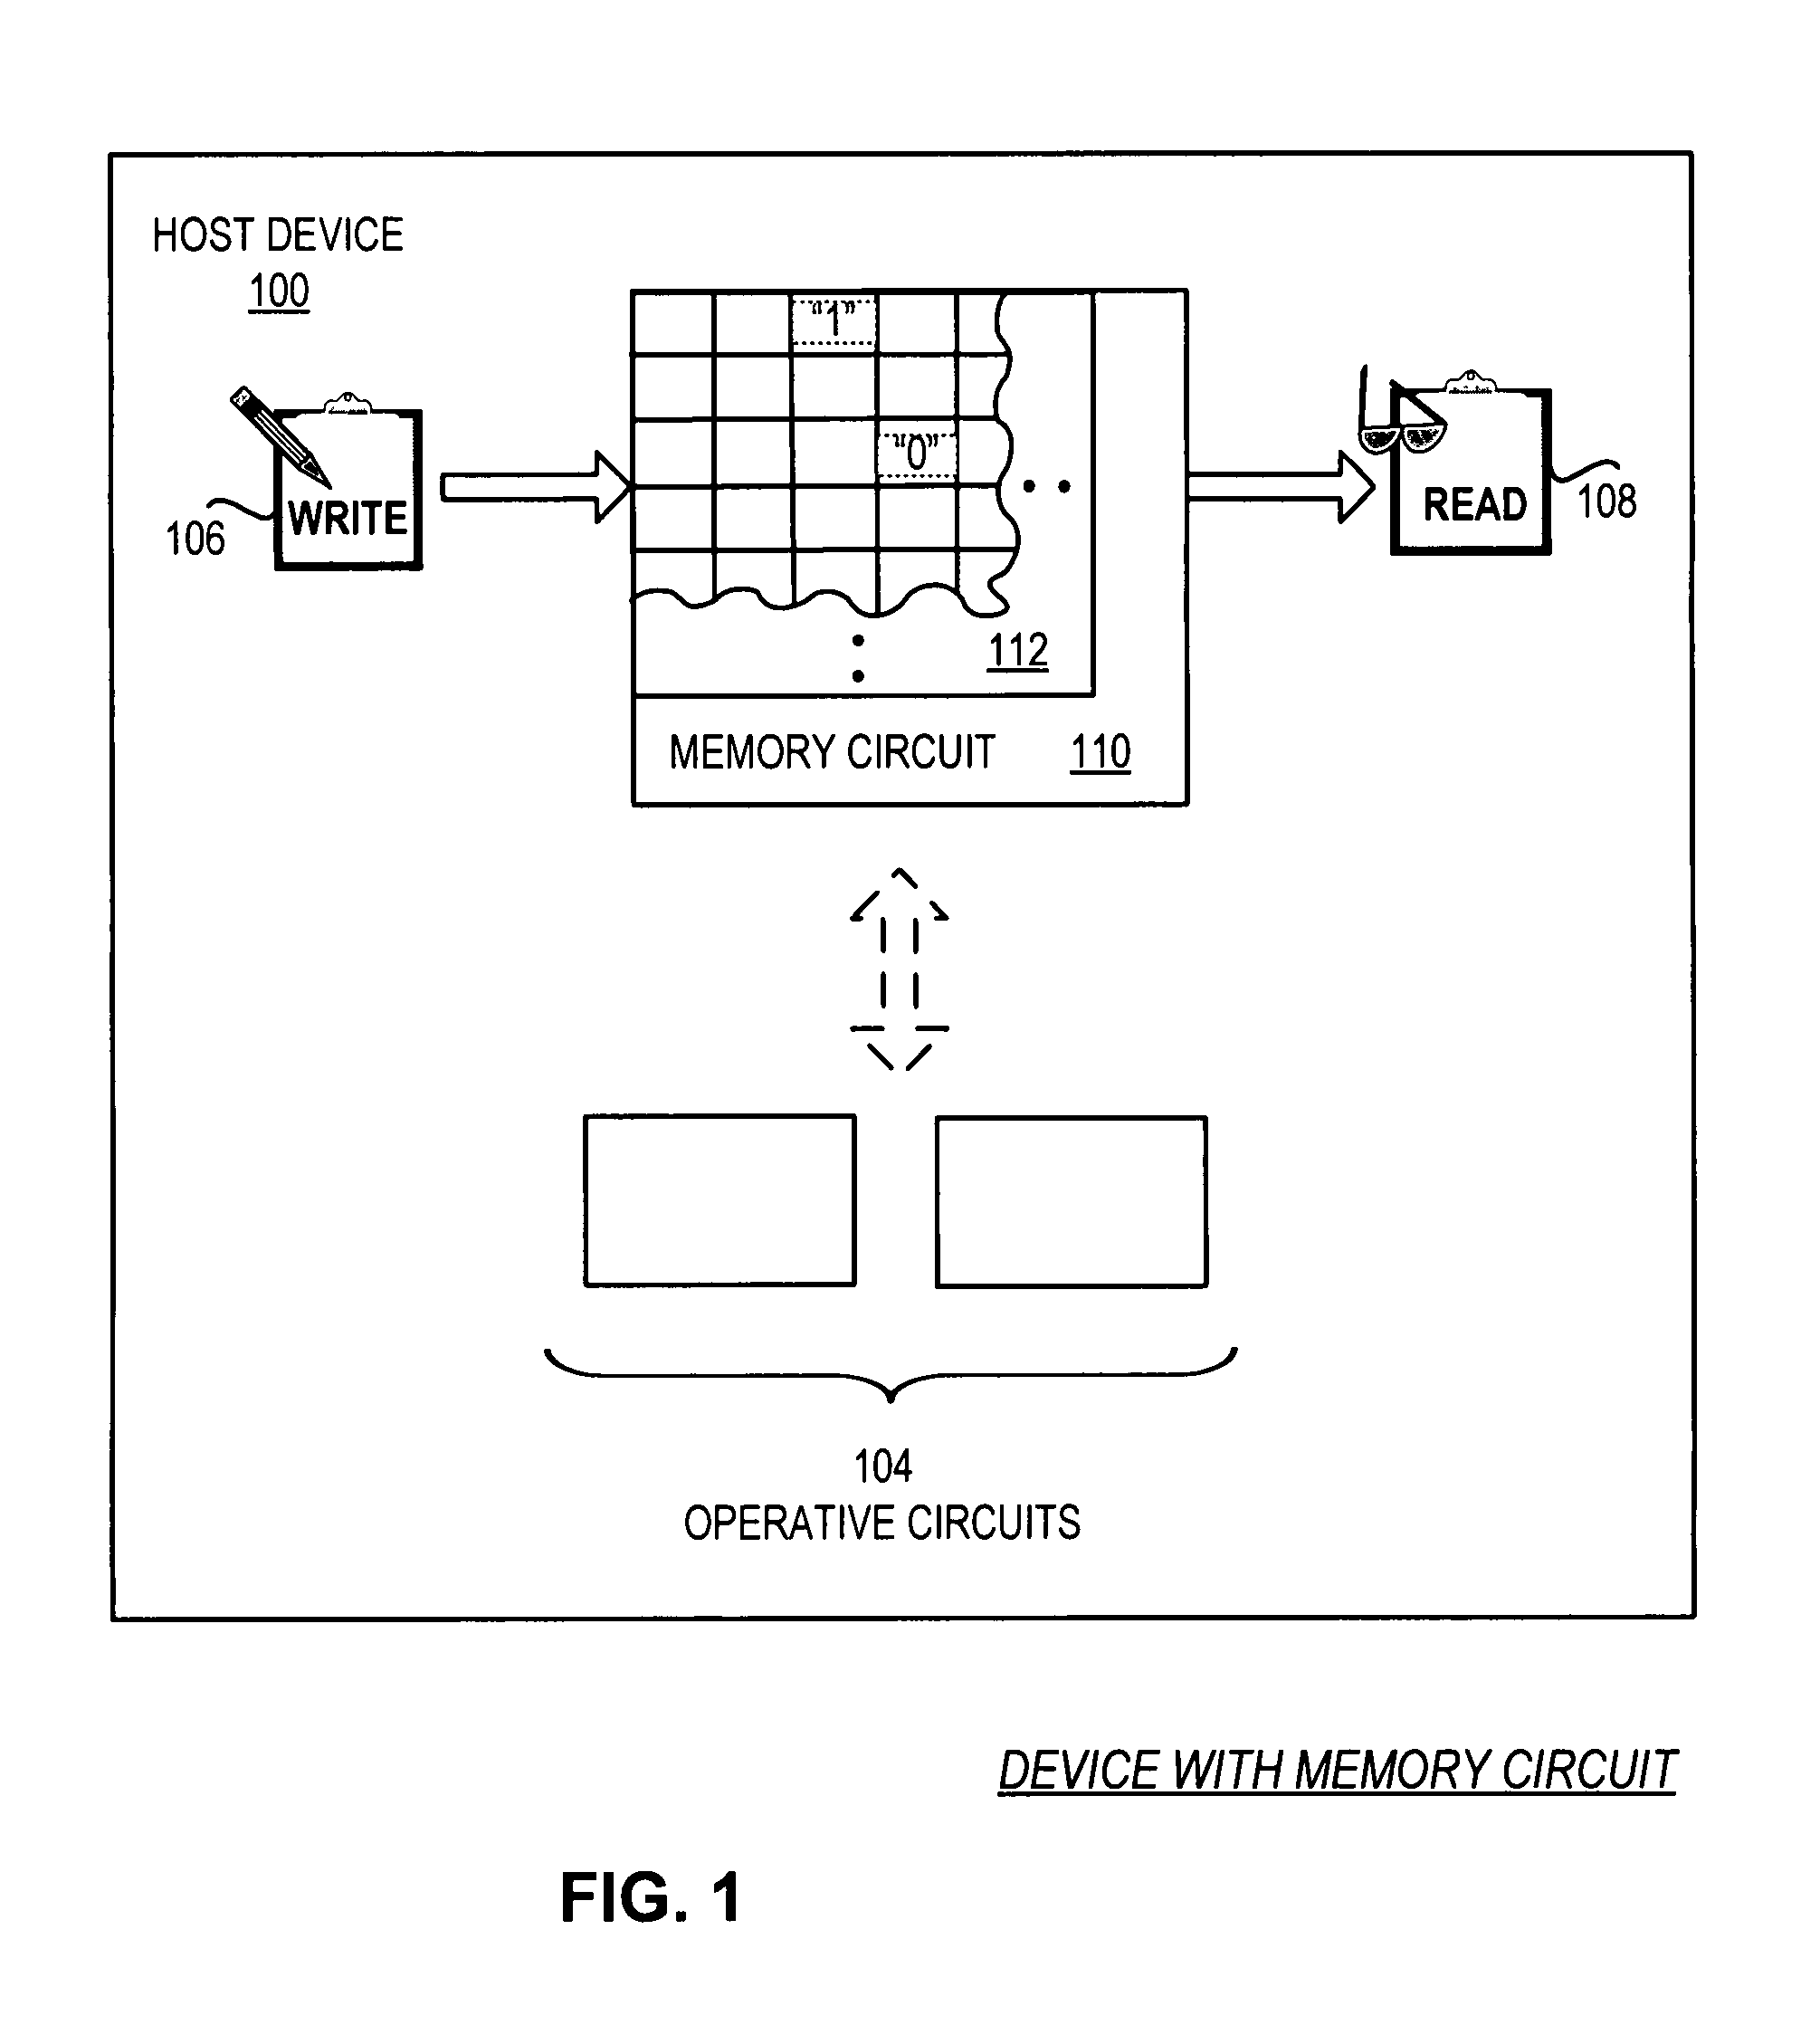 Adaptive programming of memory circuit including writing data in cells of a memory circuit